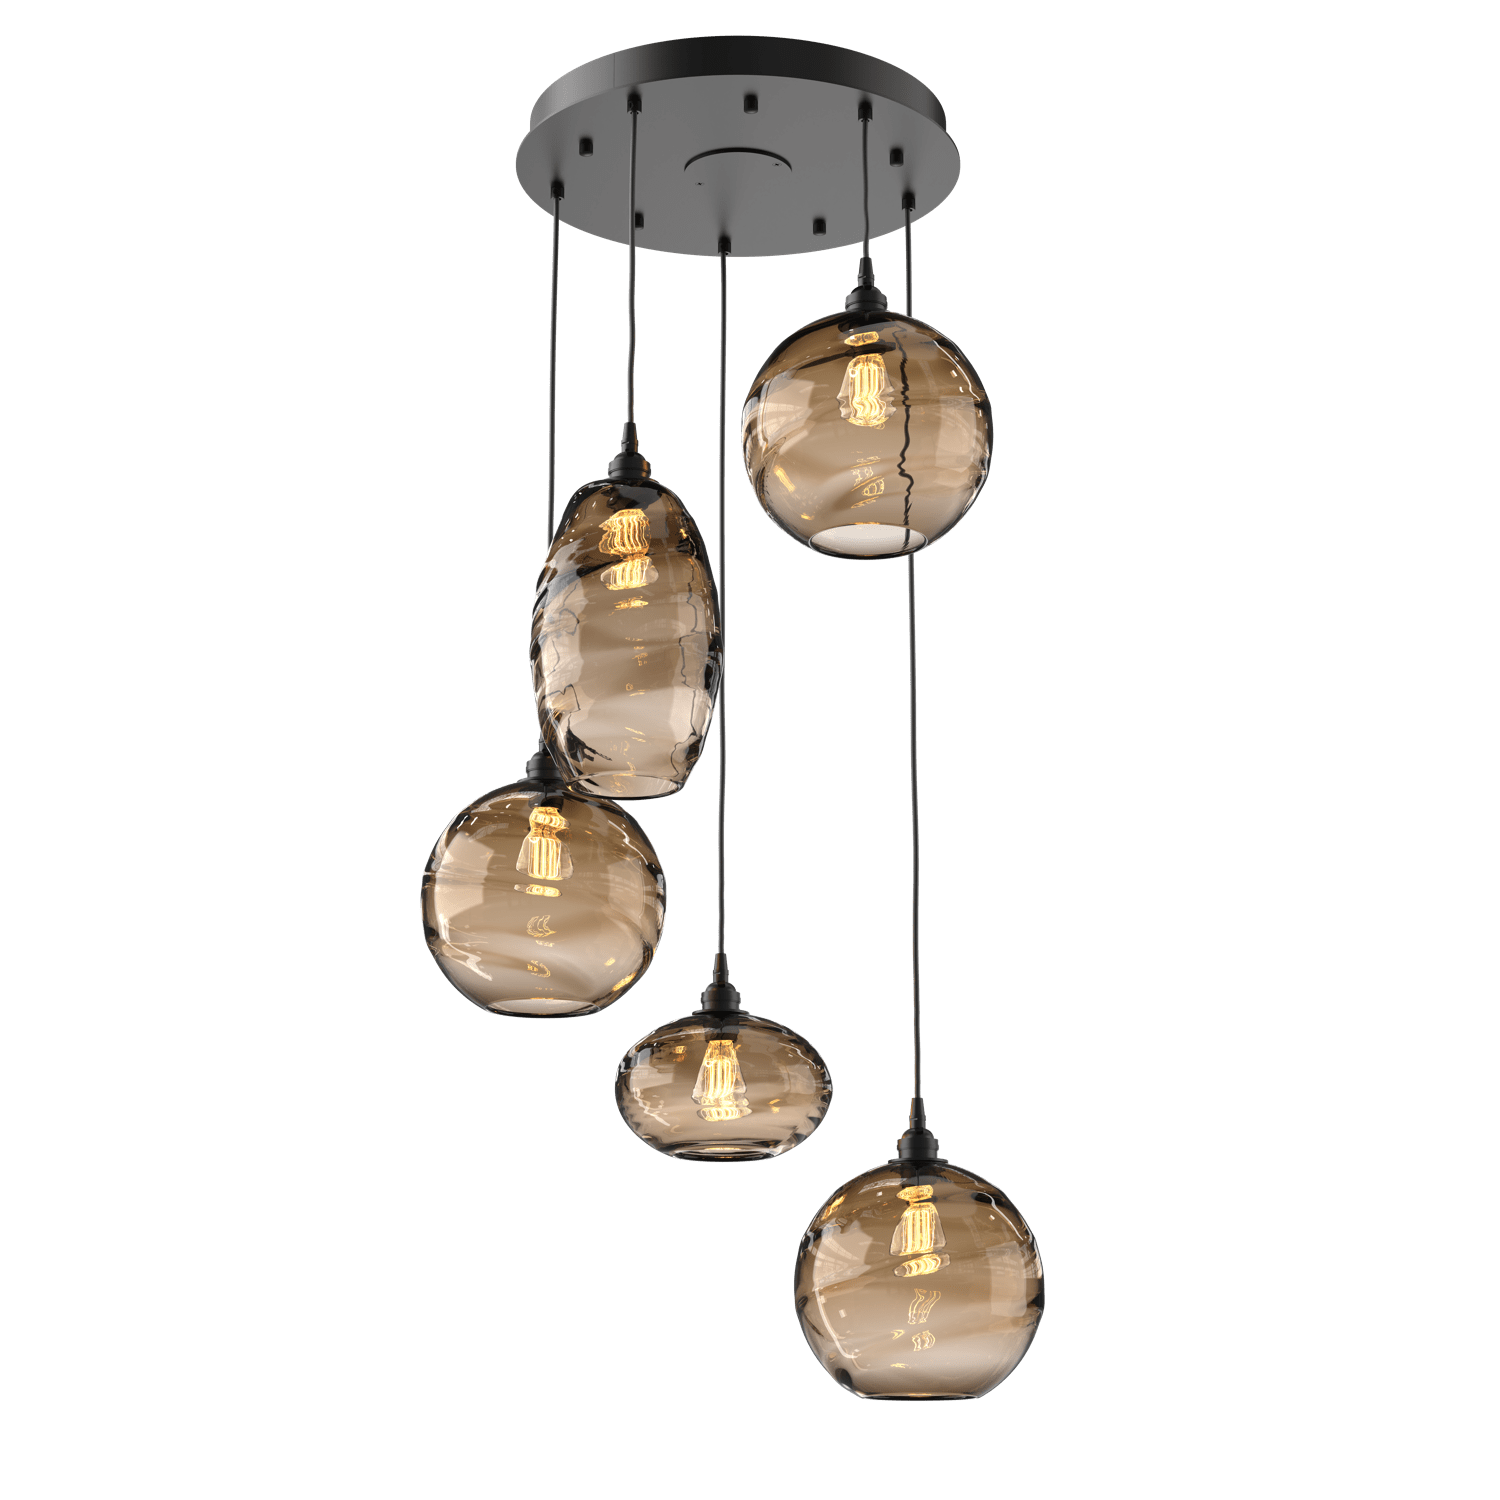 CHB0048-05-MB-OB-Hammerton-Studio-Optic-Blown-Glass-Misto-5-light-round-pendant-chandelier-with-matte-black-finish-and-optic-bronze-blown-glass-shades-and-incandescent-lamping